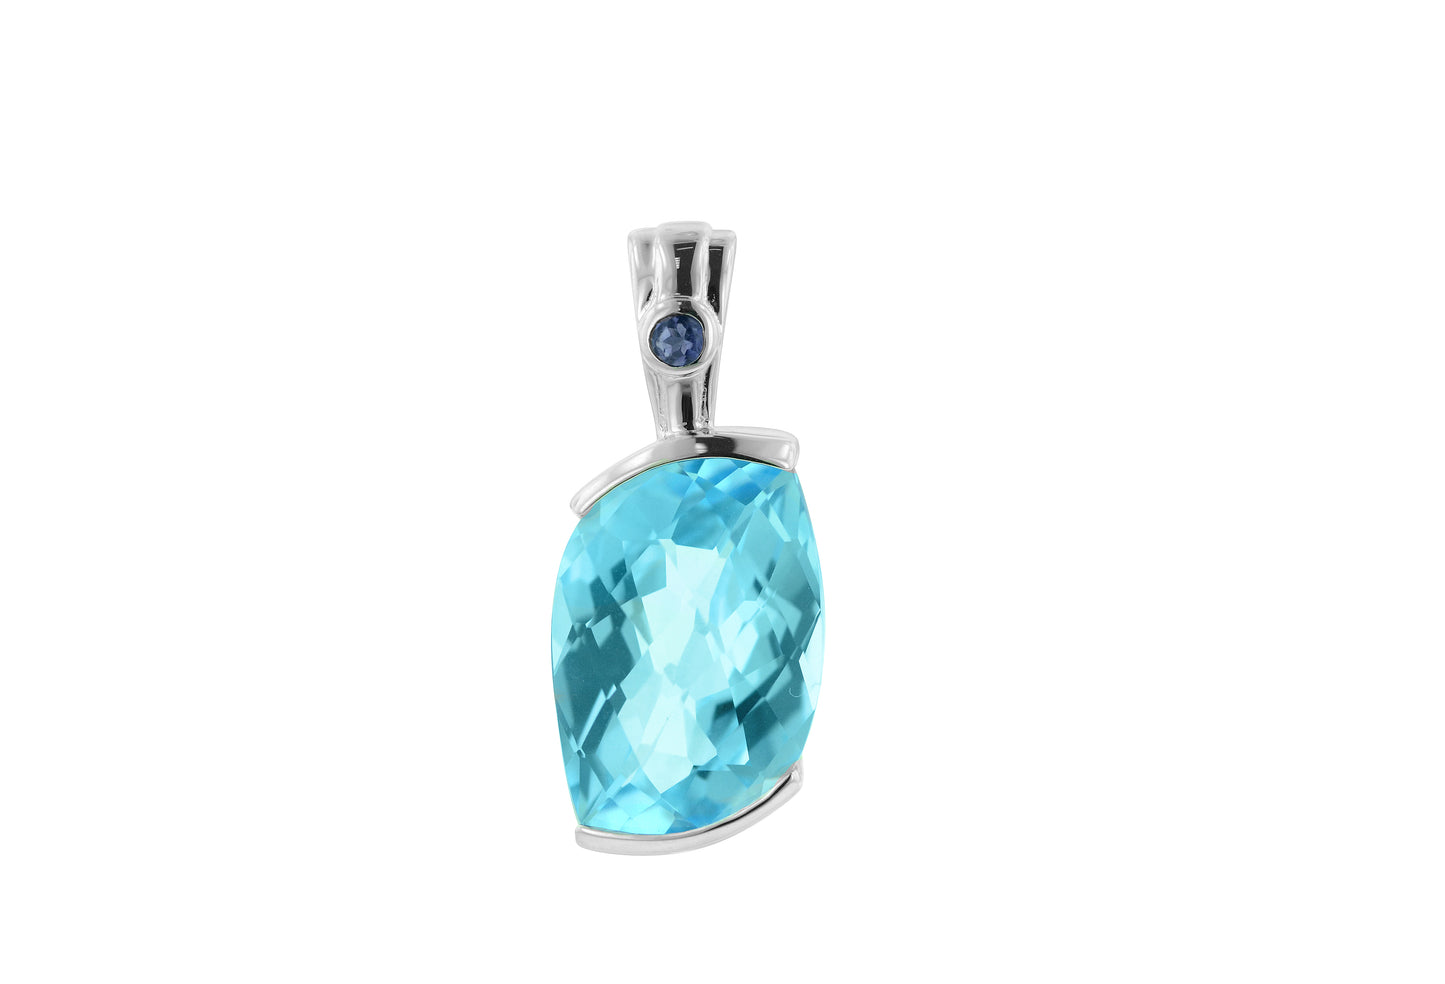 BLUE TOPAZ STERLING SILVER PENDANT - Reigning Jewels Fine Jewelry 